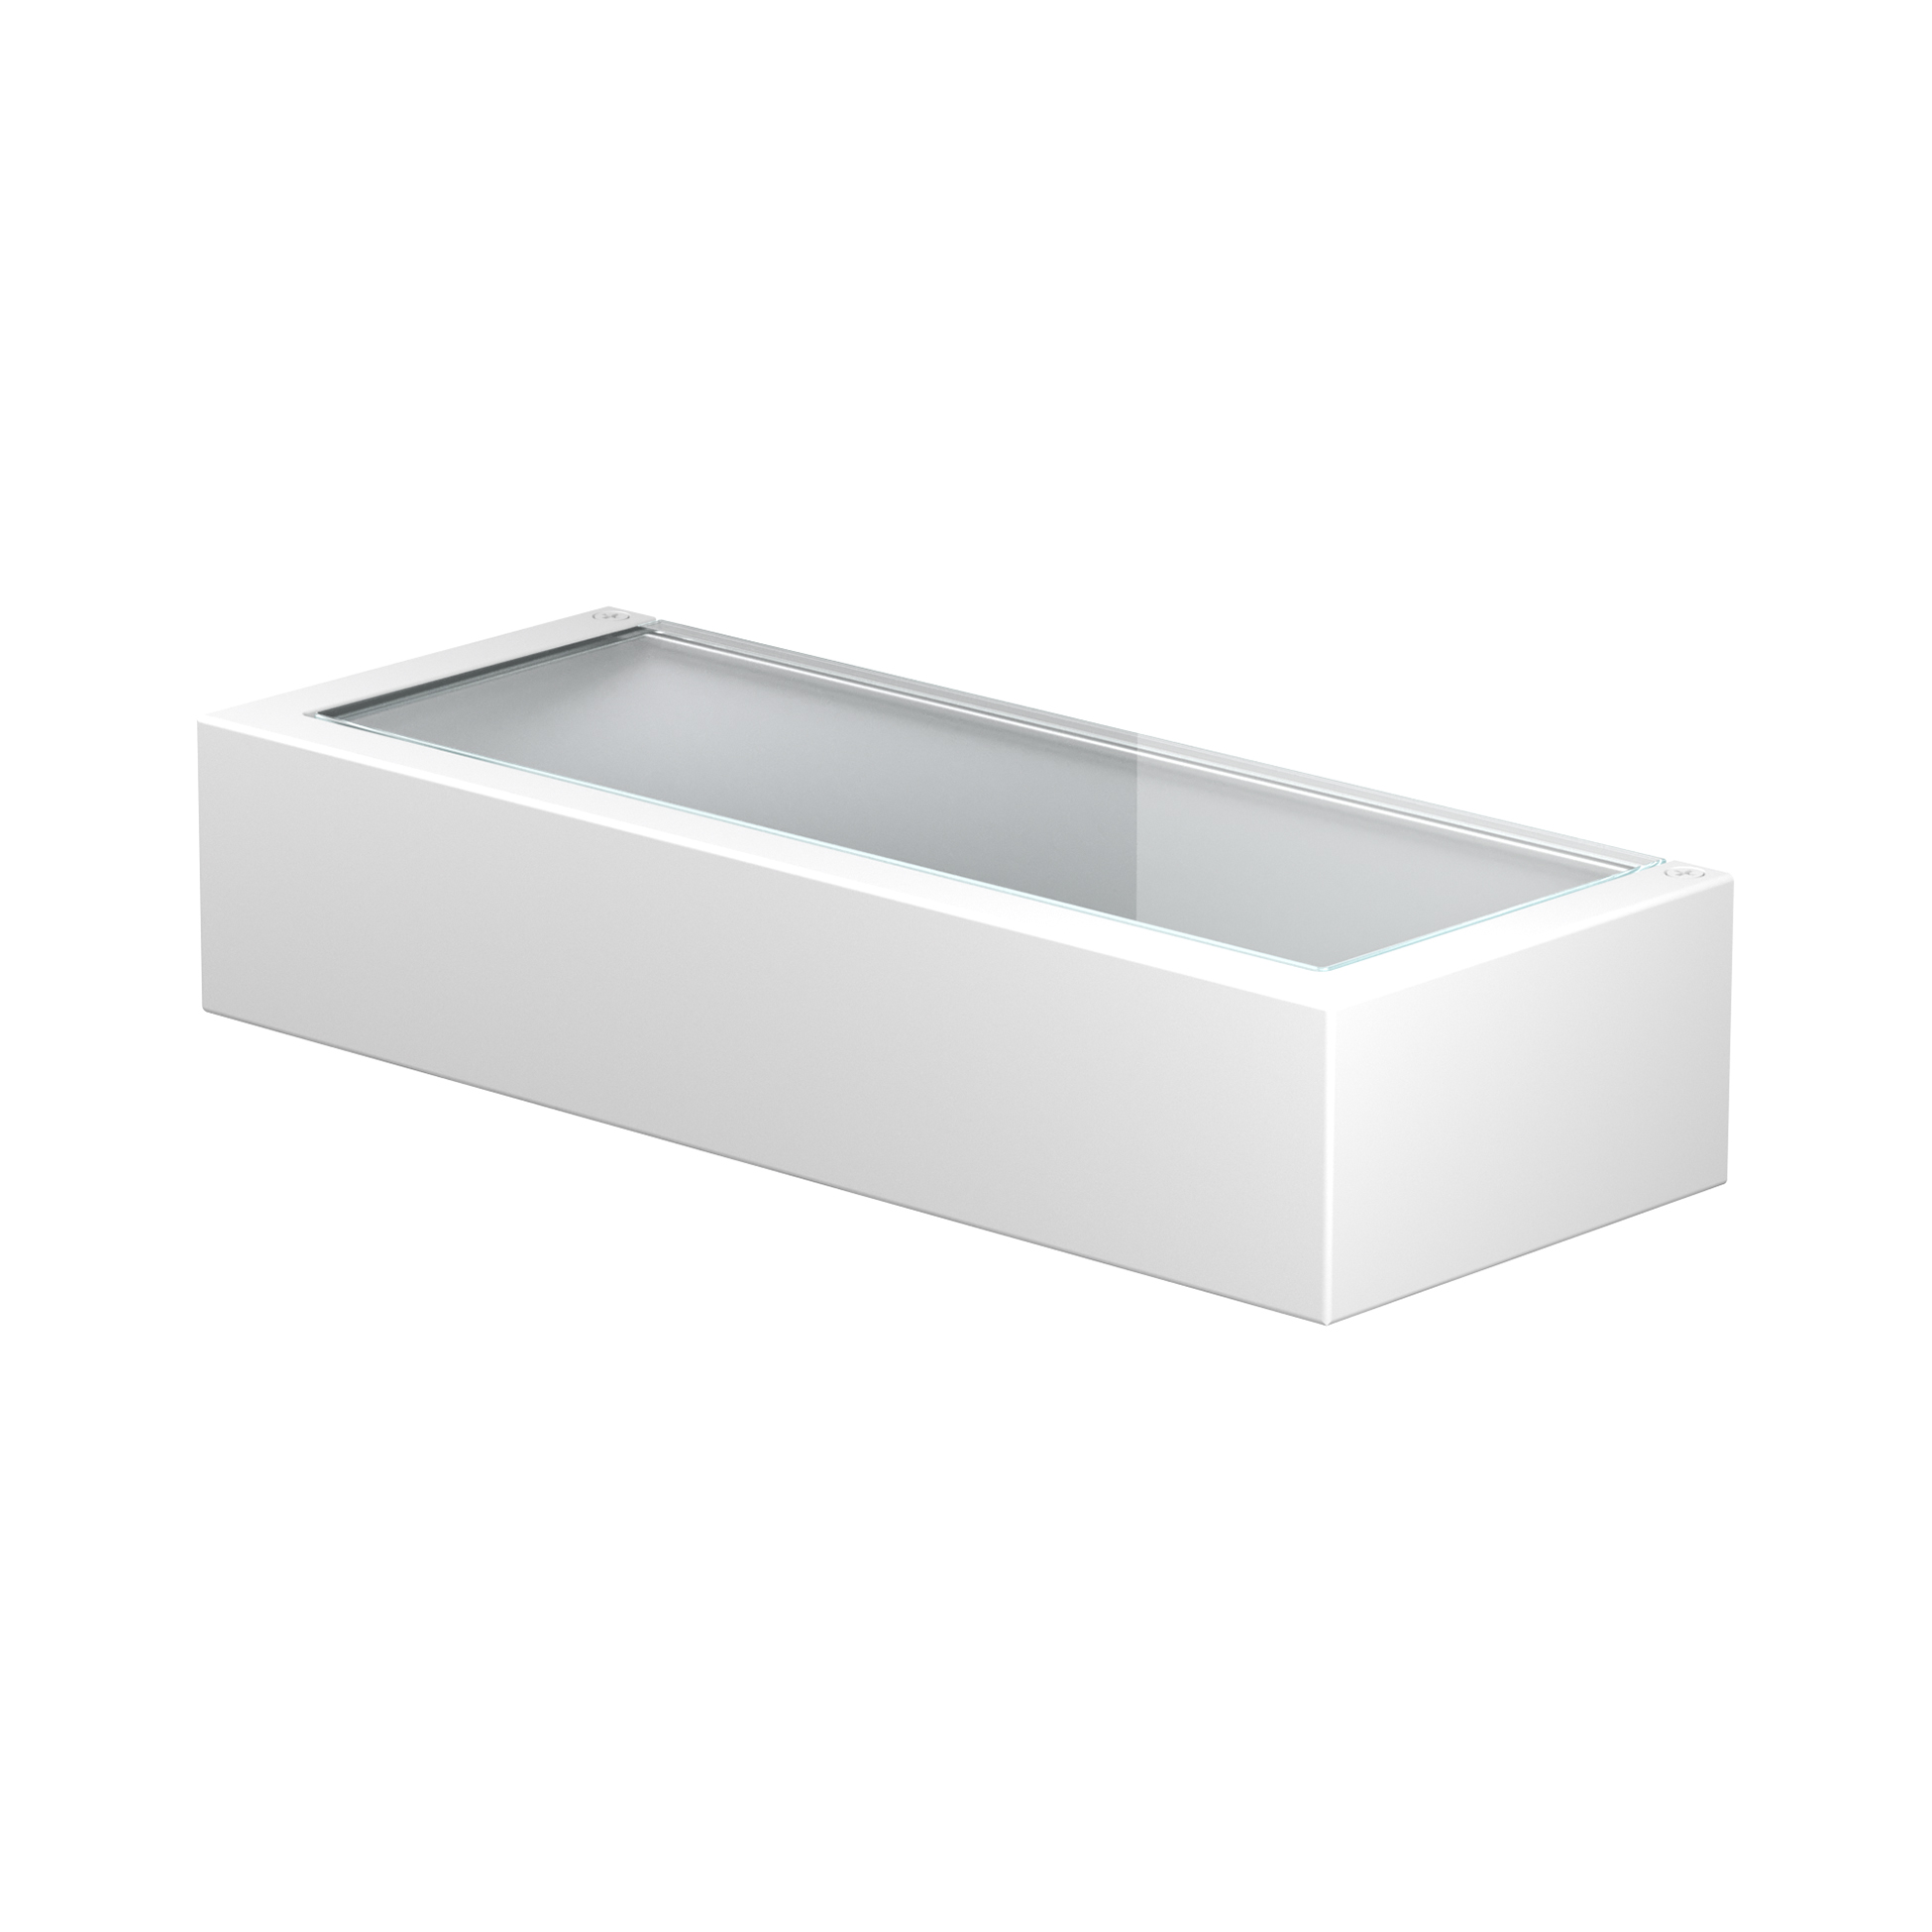 FLOS-MILE-WALL-2-UP-WHITE-1950X1950.jpg